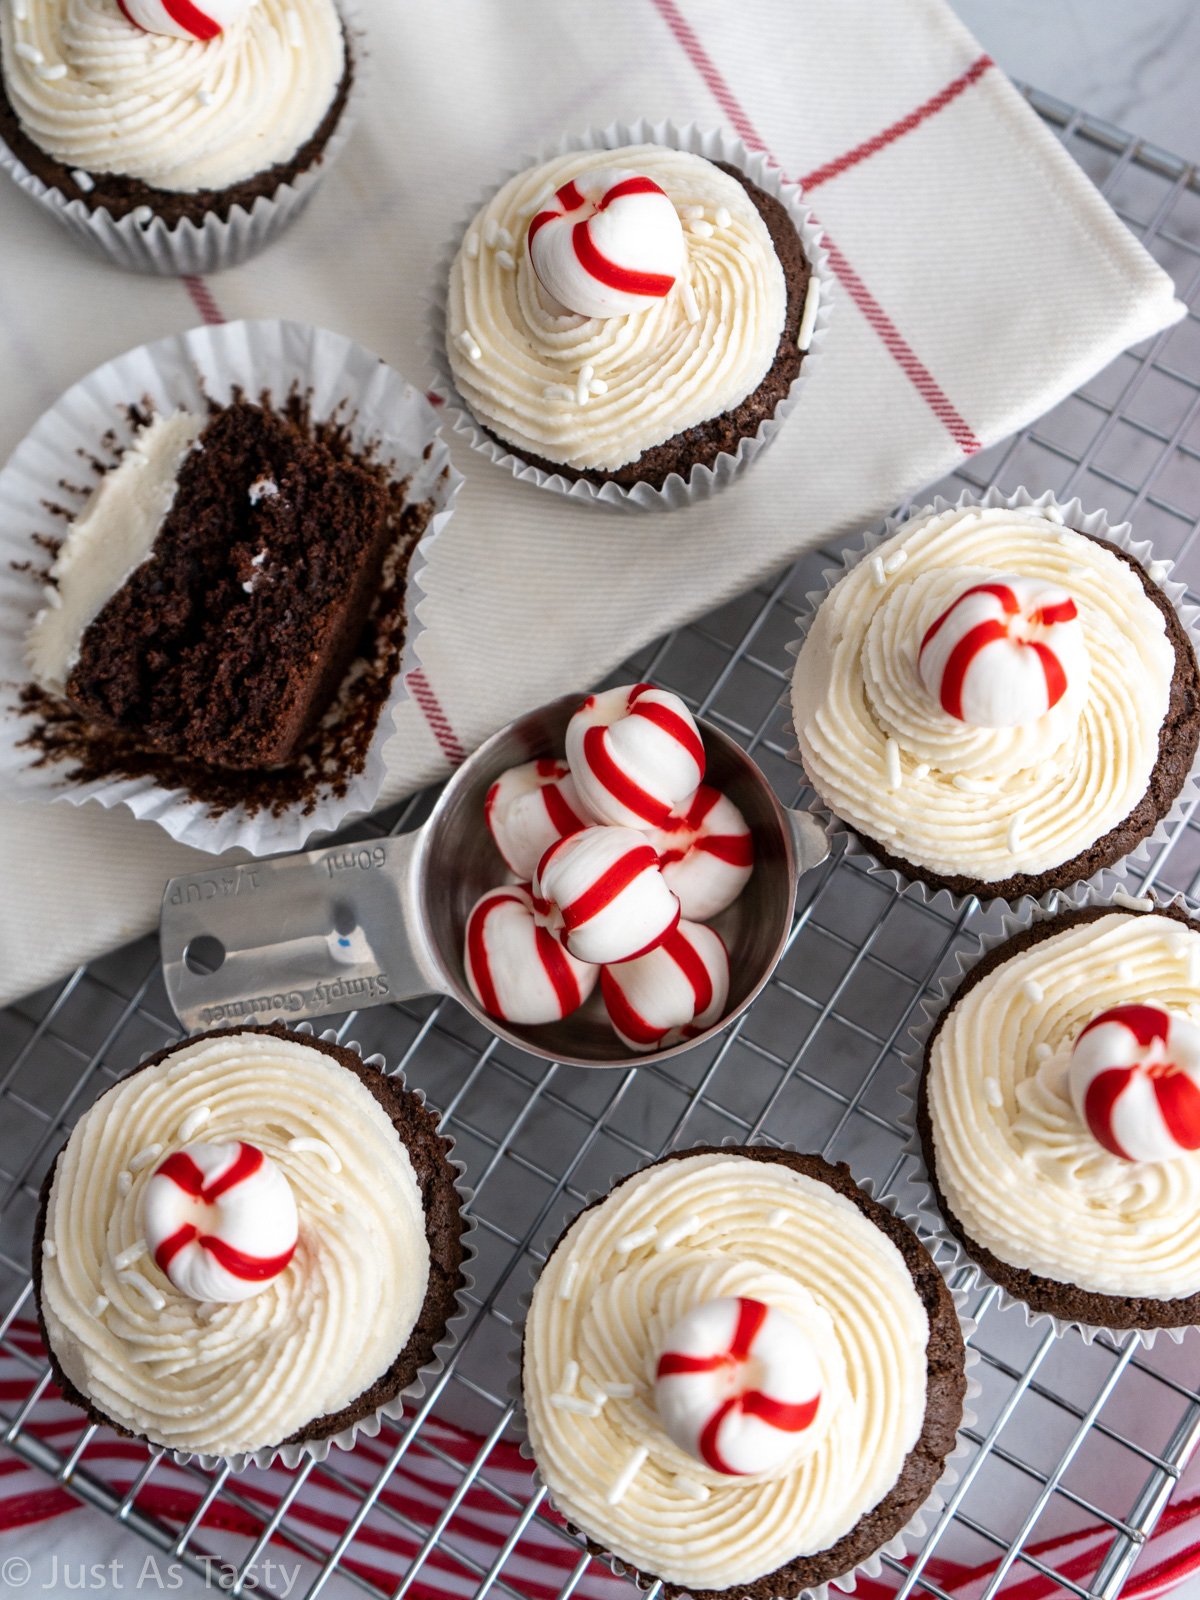 Frosted chocolate cupcakes, topped with red and white striped mints, on a wire cooling rack.